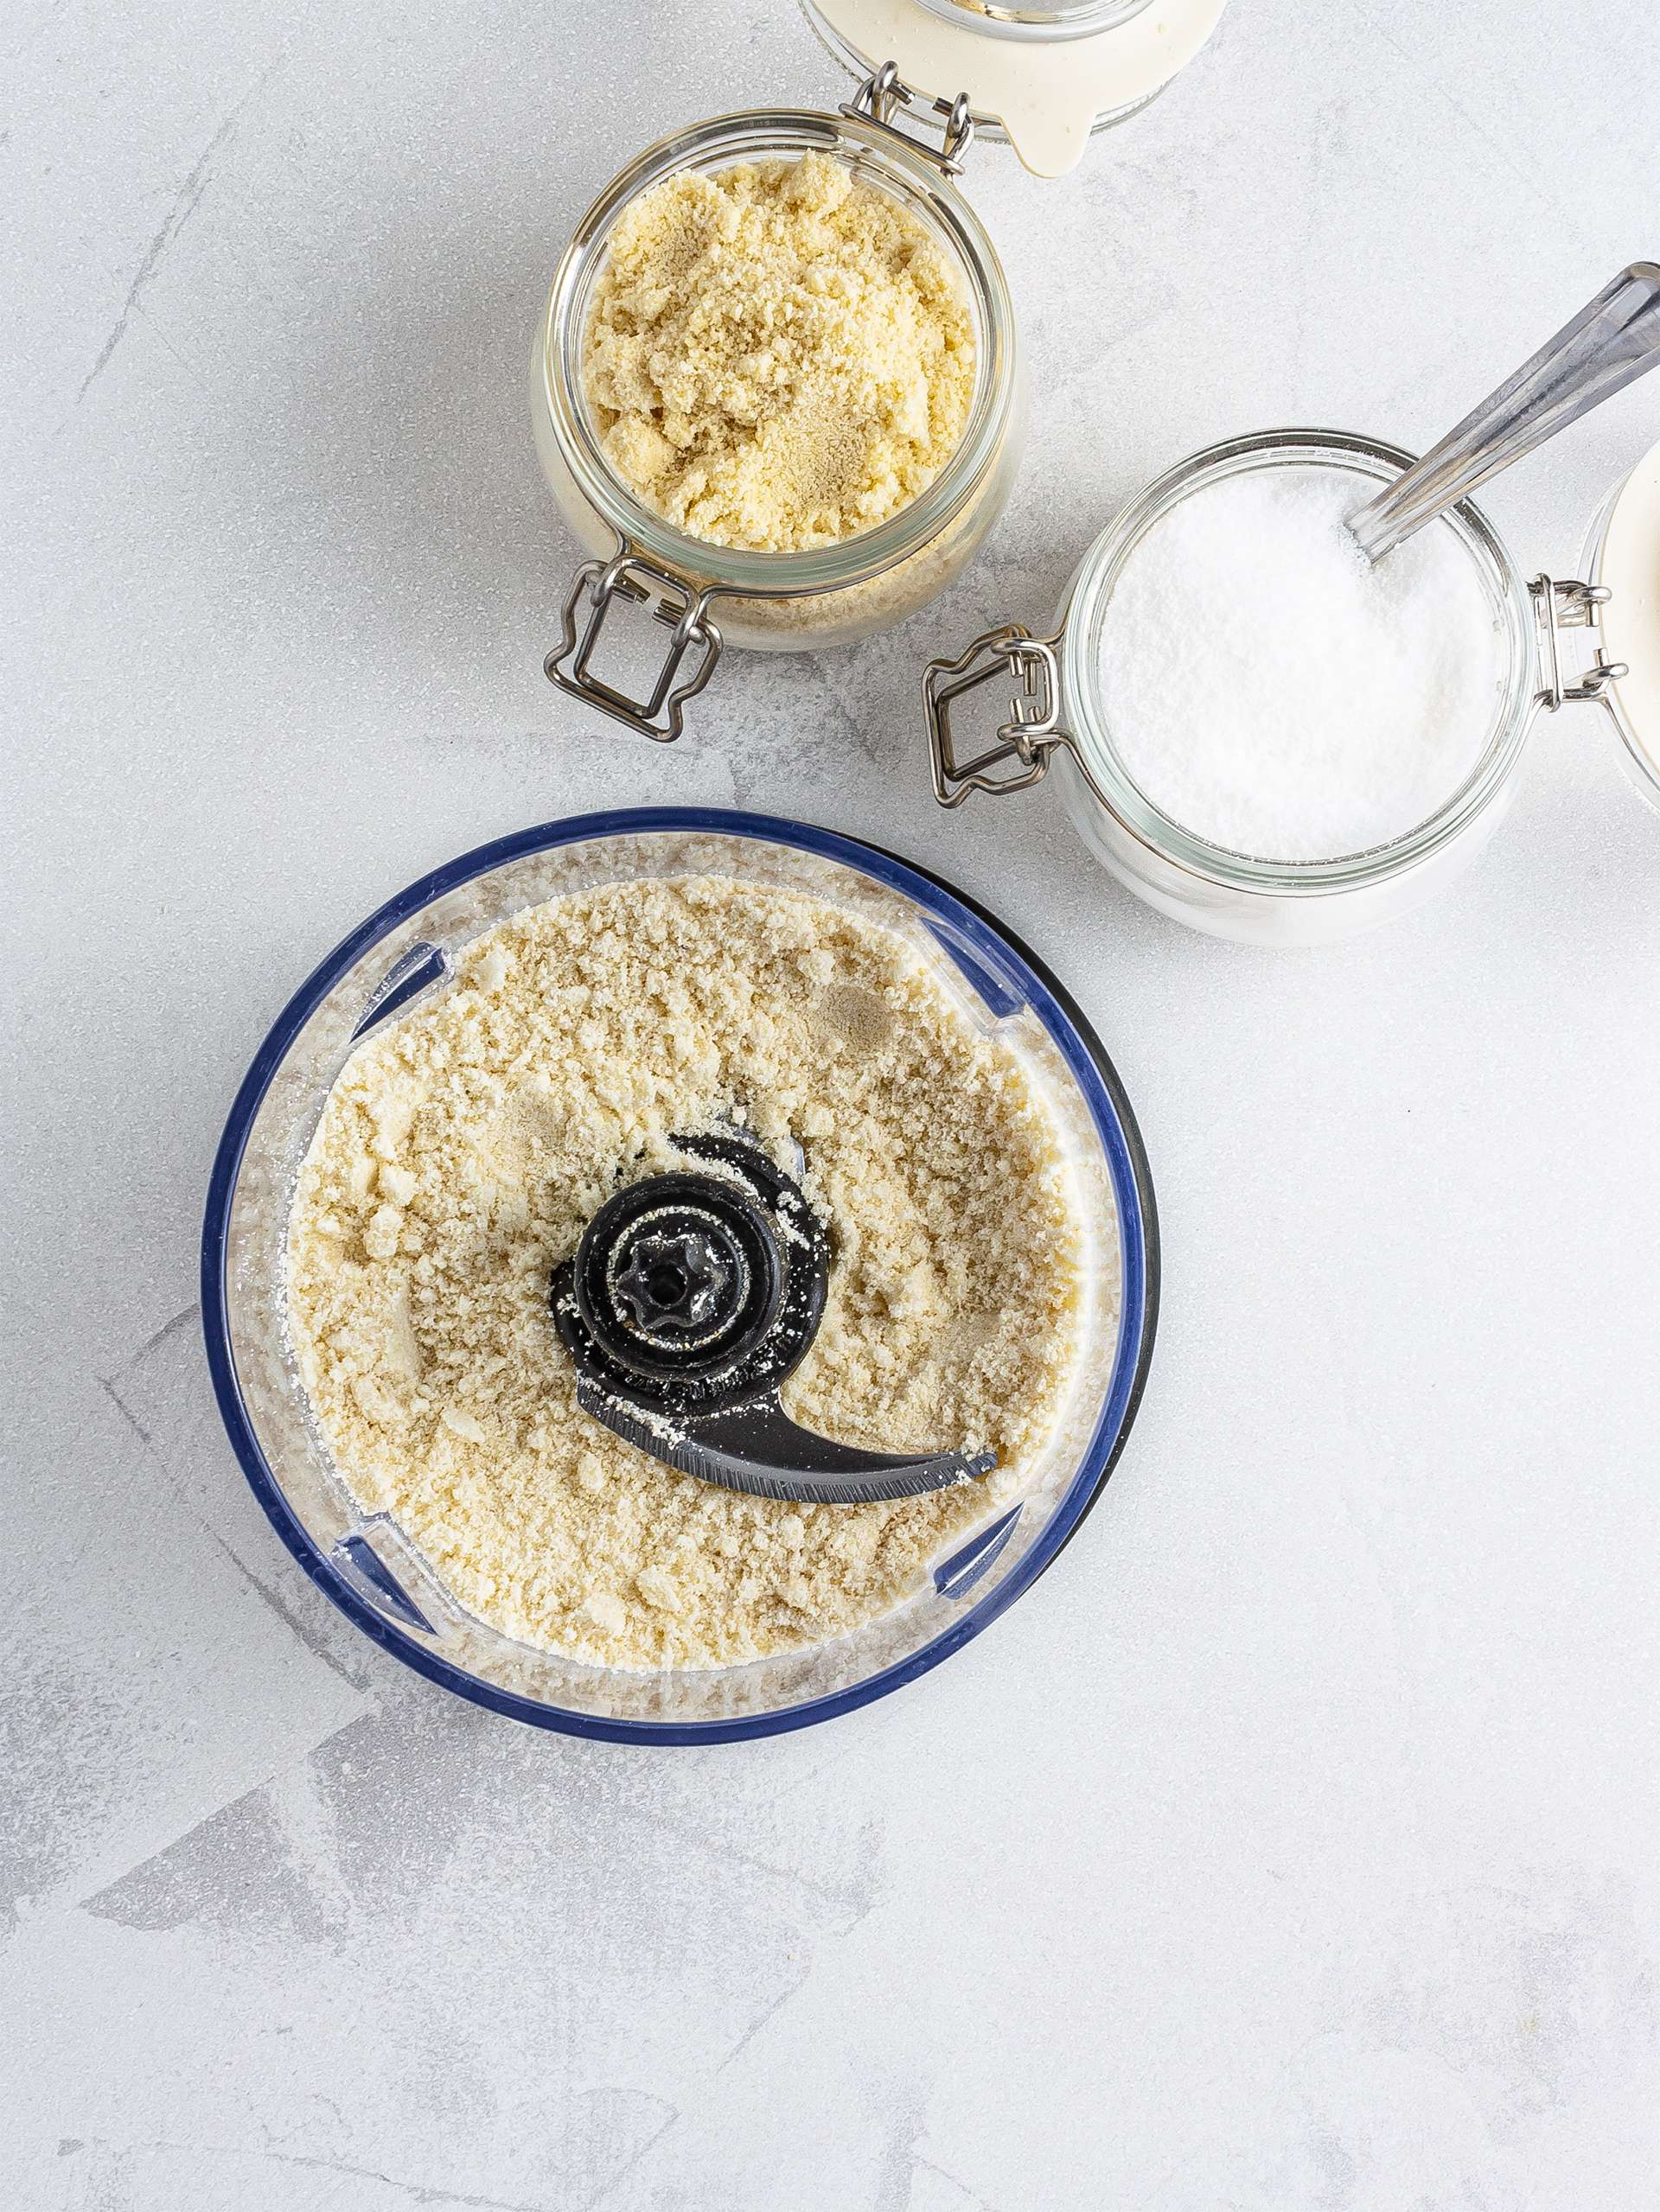 Almond flour and erythritol in a food processor